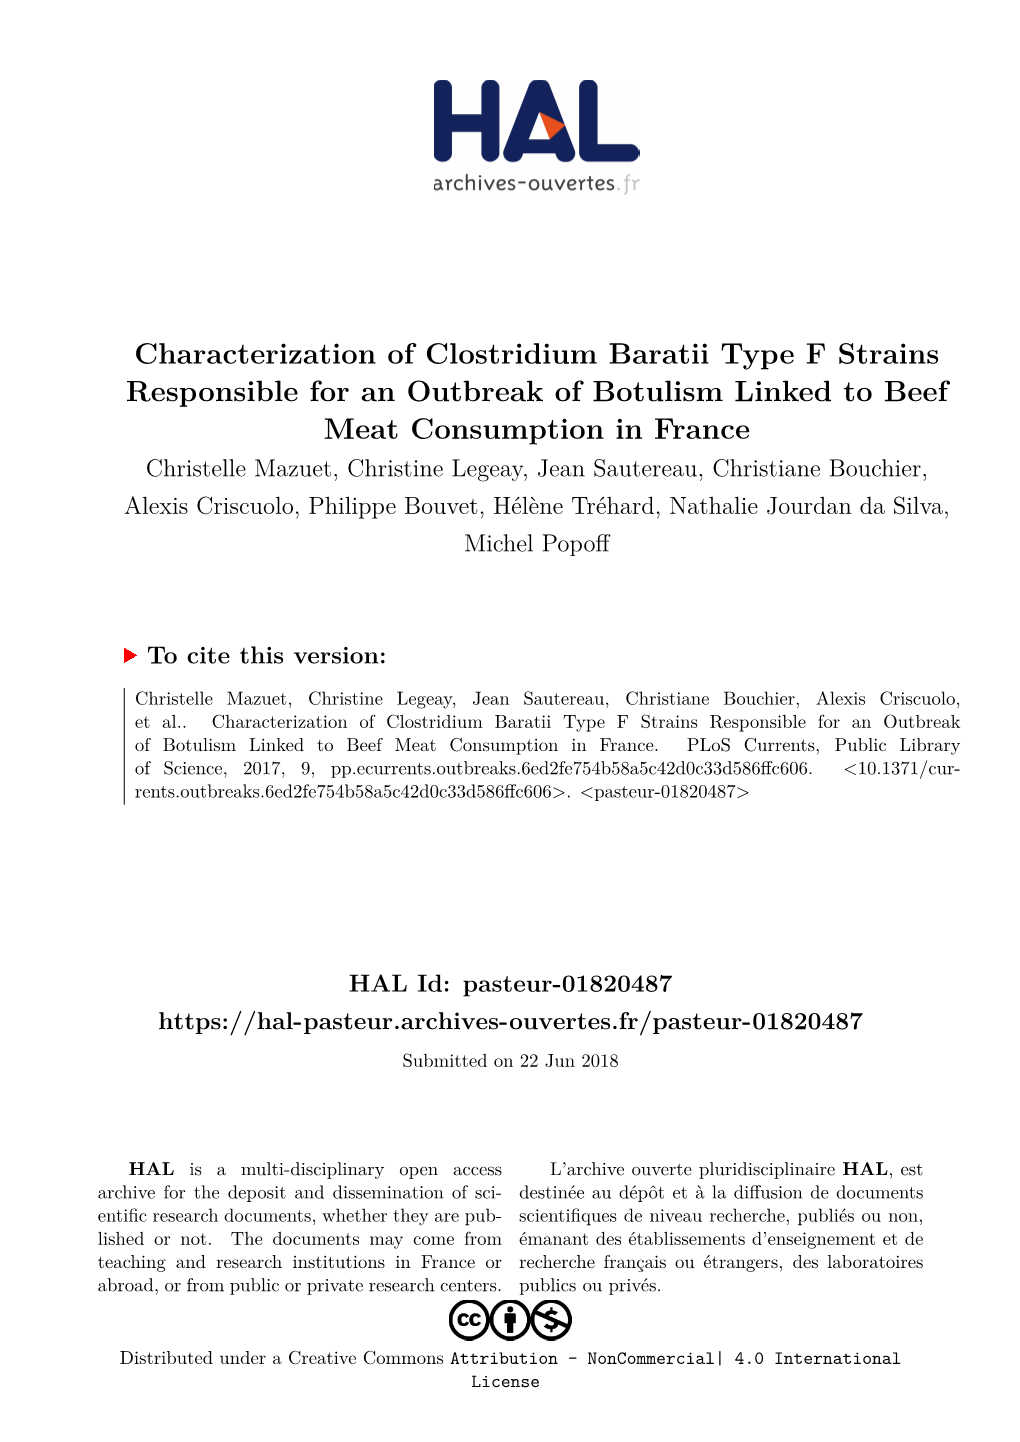 Characterization of Clostridium Baratii Type F Strains Responsible for An